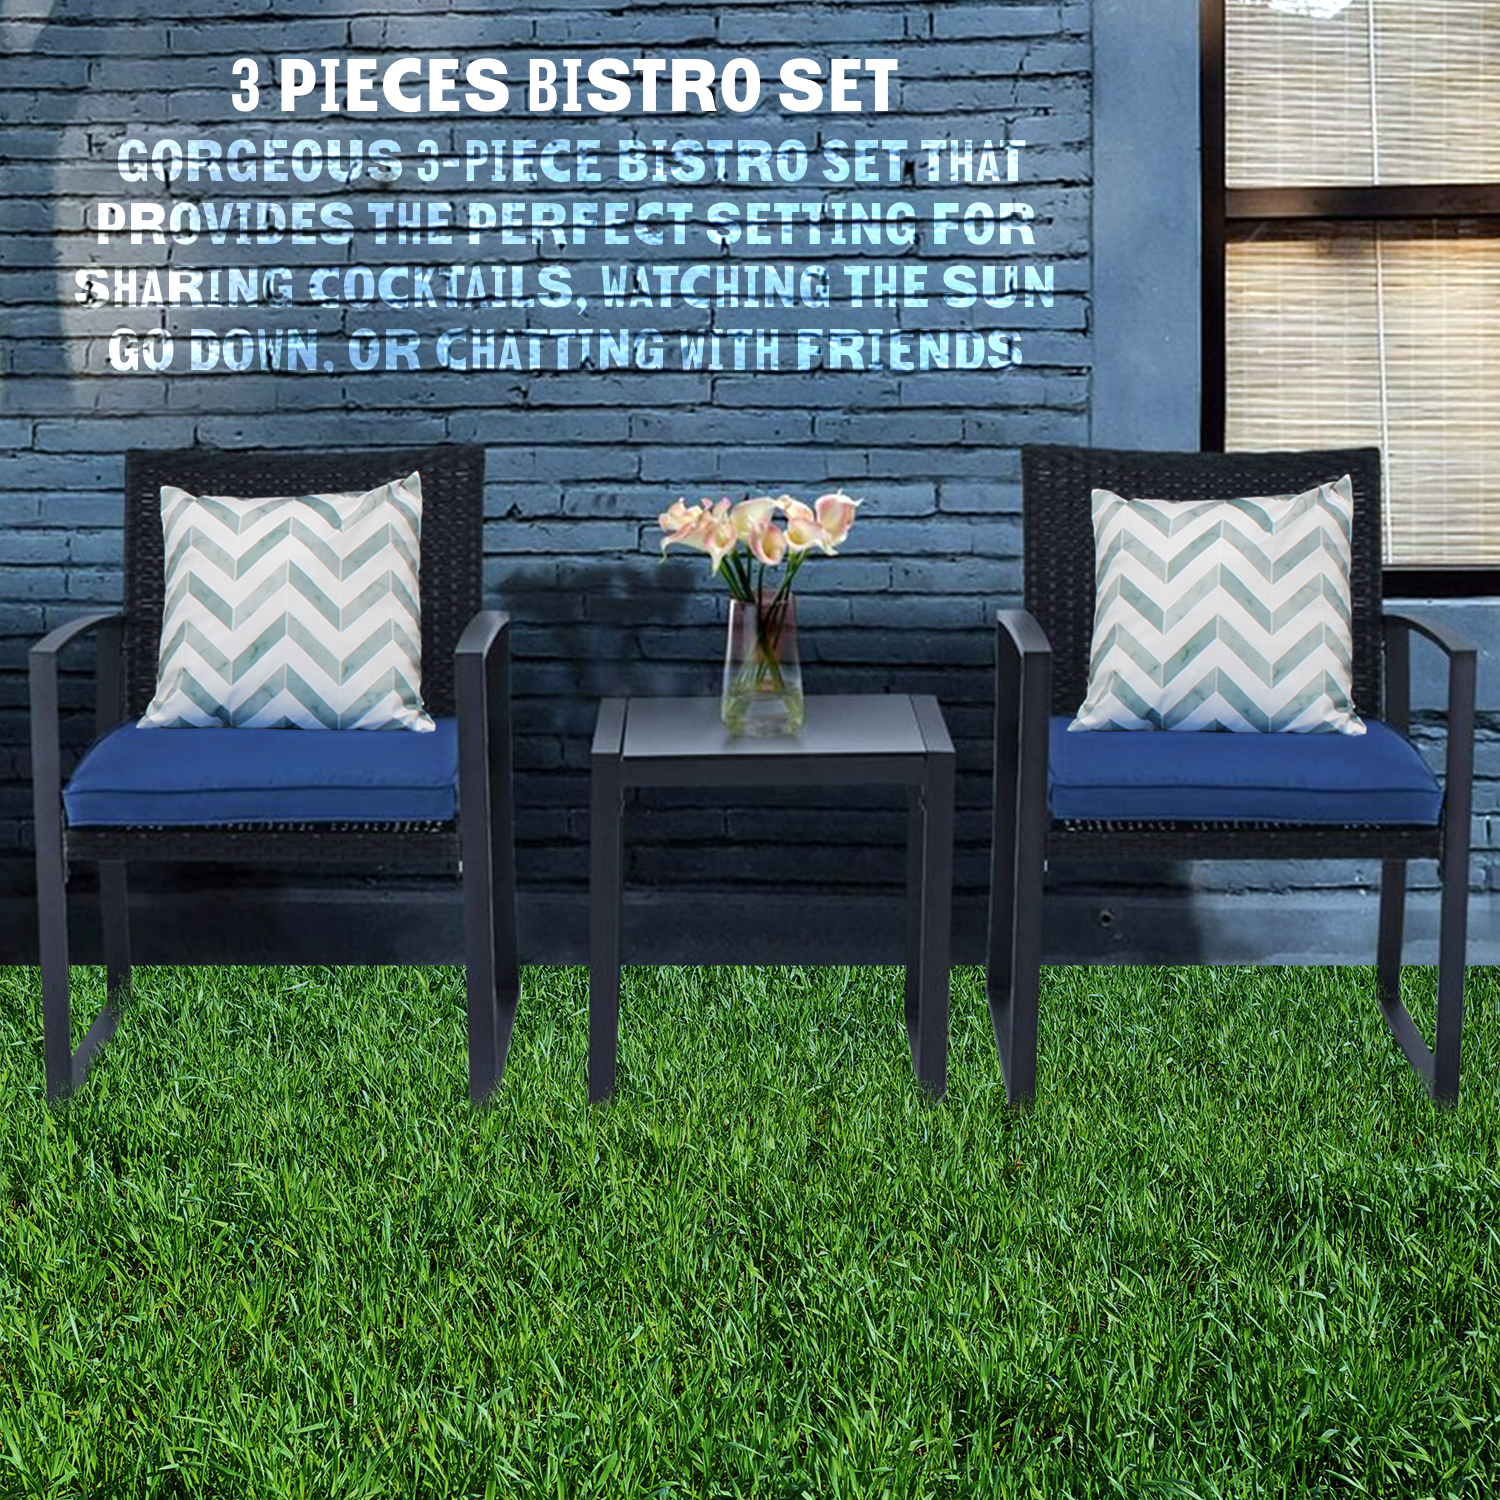 PyramidHomeDecor Black Wicker Furniture - 3 Piece Bistro Set for Outdoor Conversation - 2 Cushioned Rattan Chairs with Glass Coffee Table for Patio, Lawn, Porch, Lounge, Deck, Balcony & Living Room - image 3 of 7